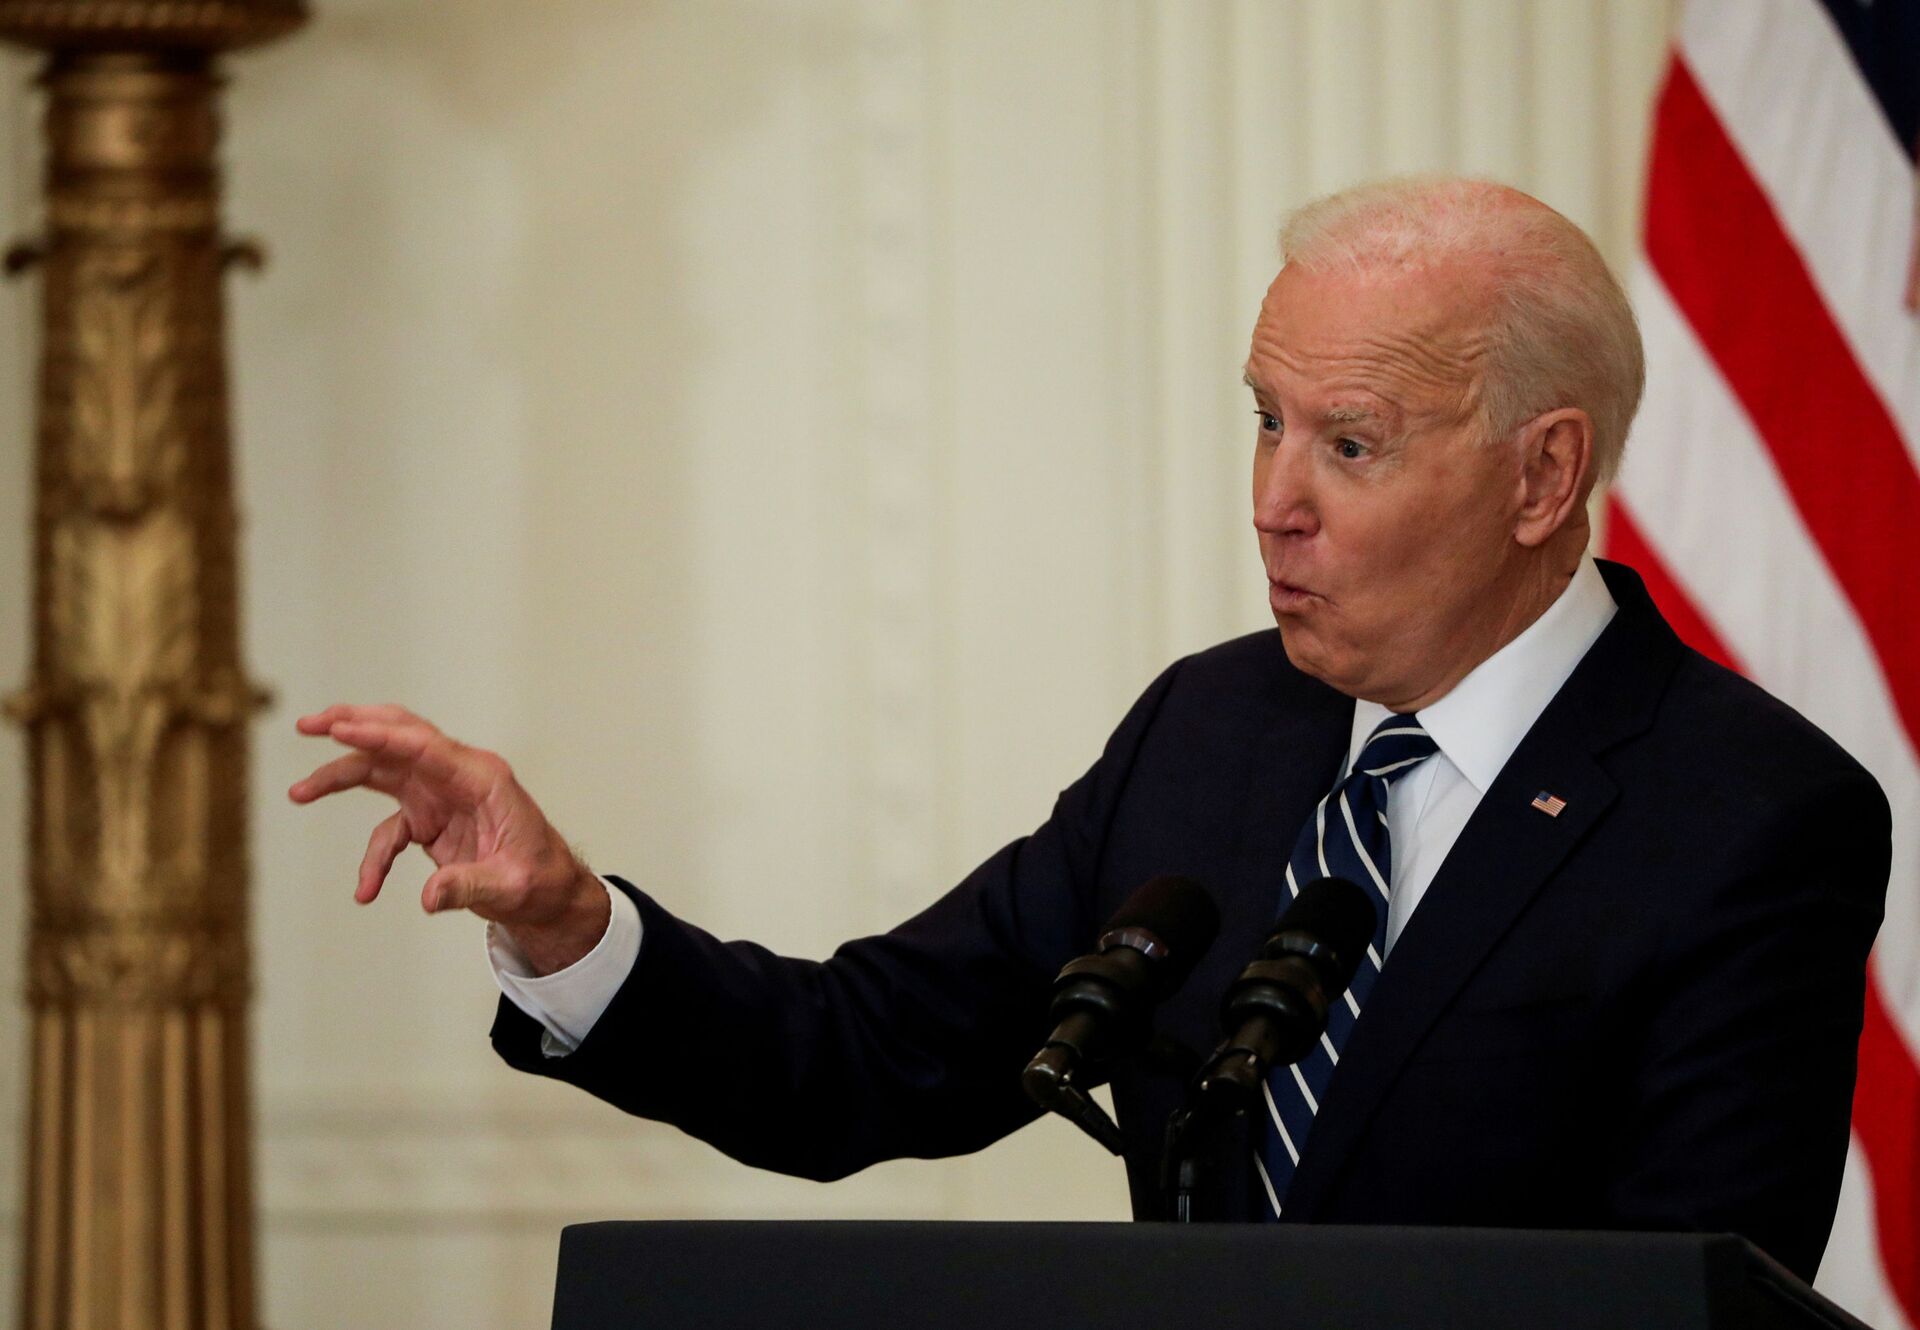 'Very Sad to Watch': Trump Decries Media for Asking 'Easy' Questions at Biden Press Conference - Sputnik International, 1920, 26.03.2021